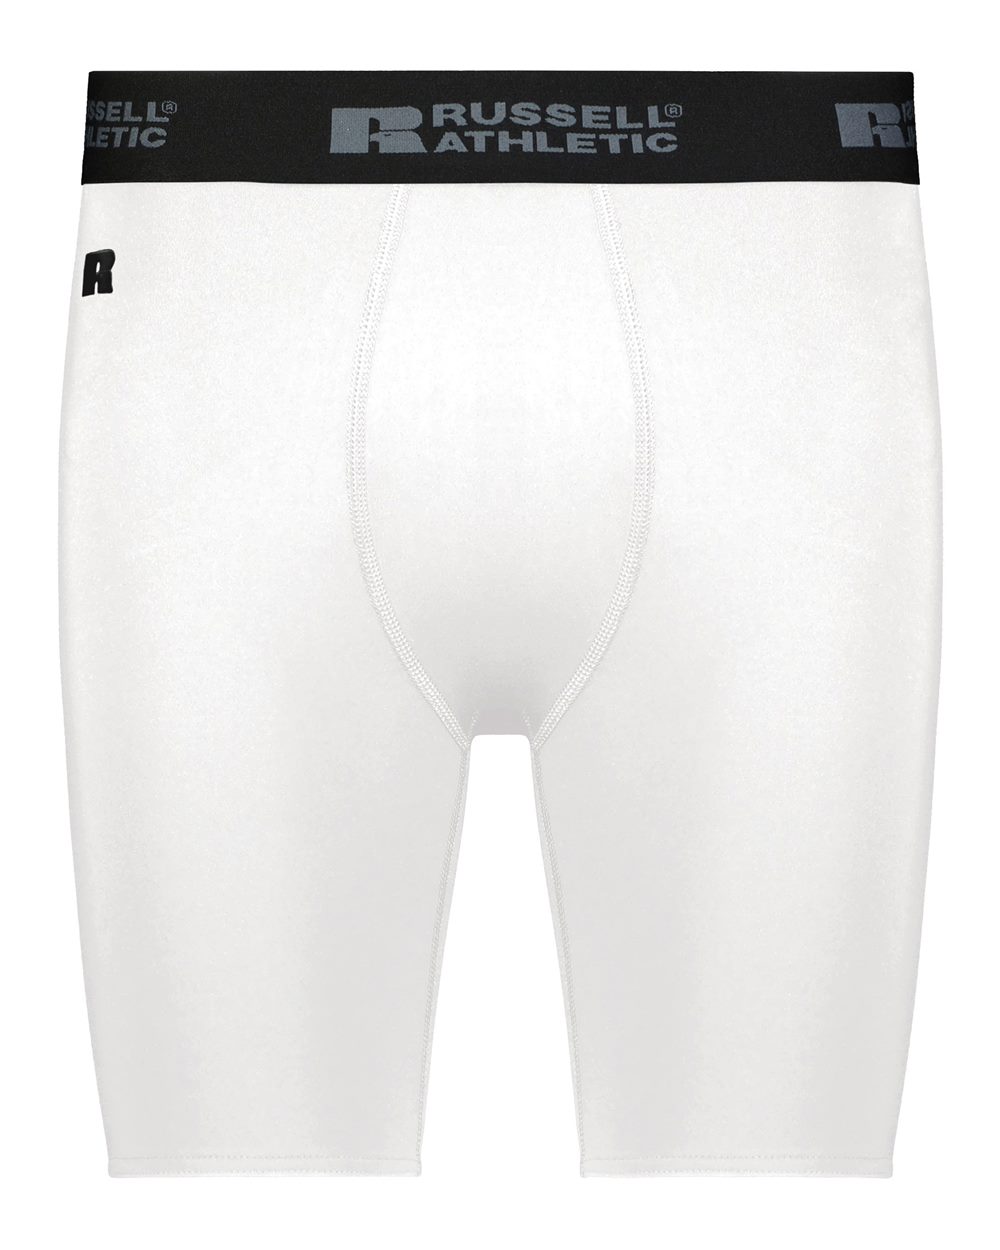 Russell Athletic - CoolCore Compression Shorts, 84/16 polyester/spandex  elastane Xtreme compression cloth, Unleash Your Style with Our Trendy  Athletic shorts, Curated by RADYAN